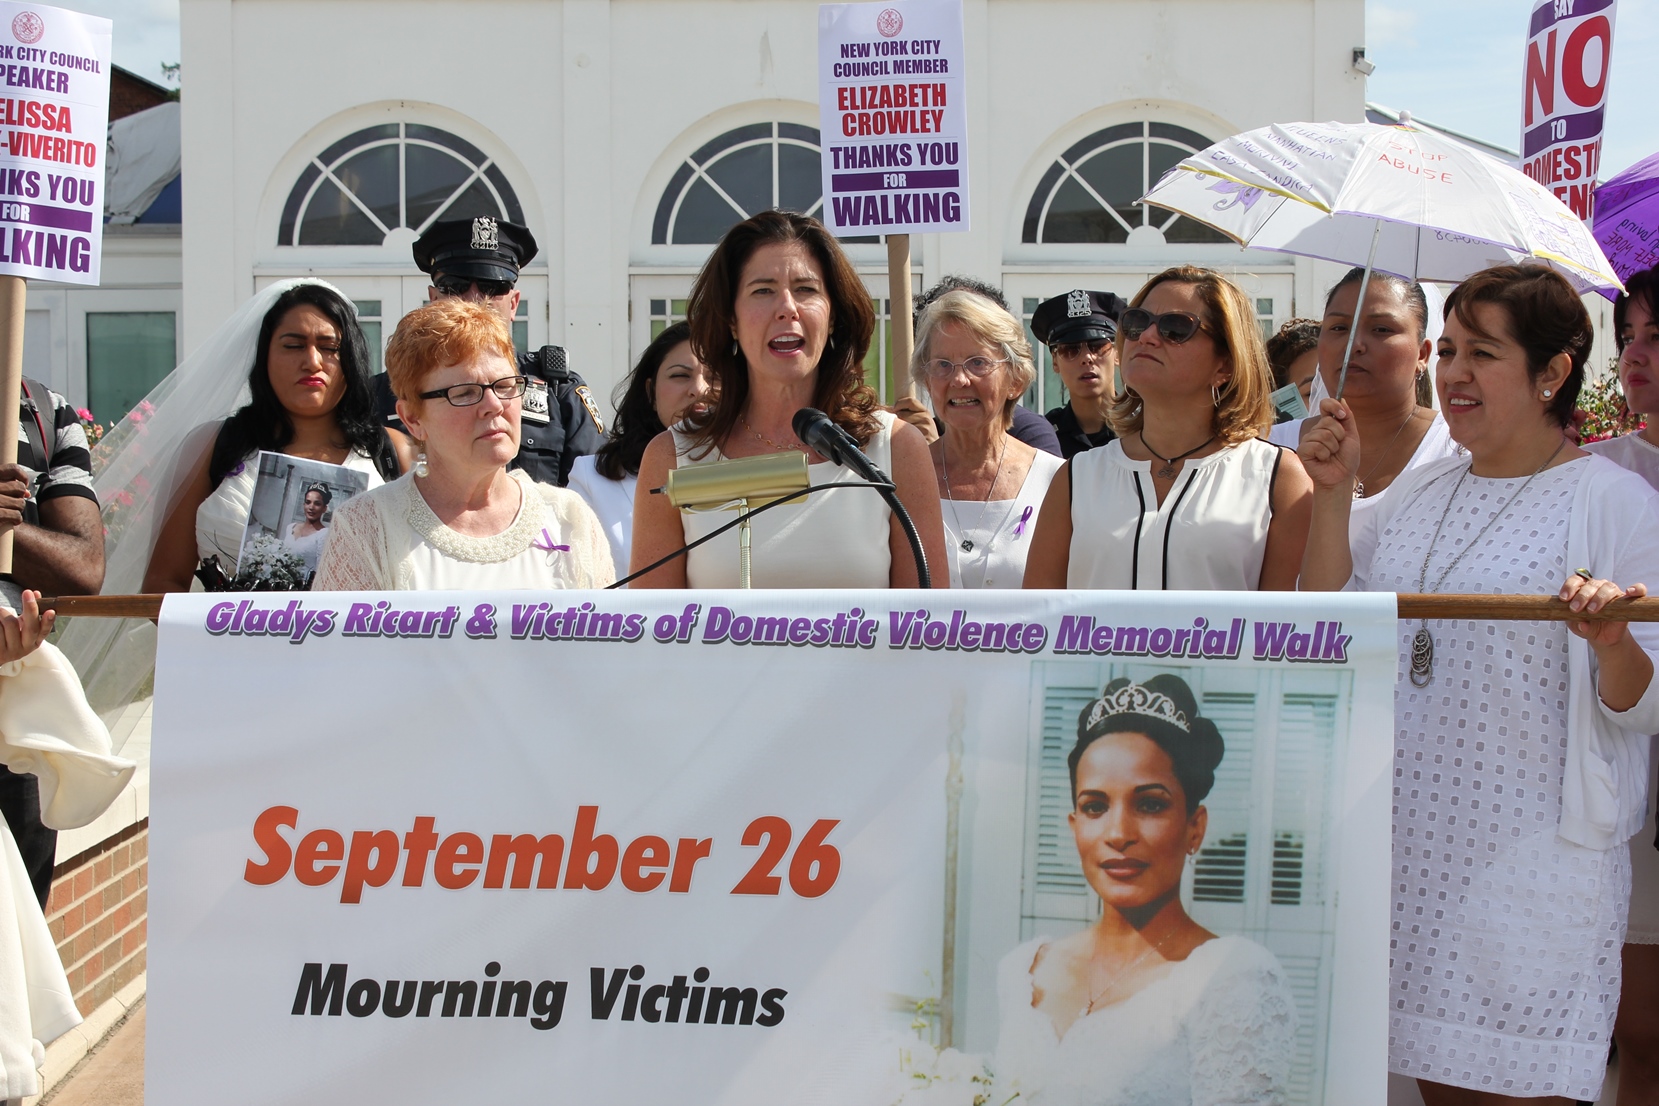 Councilwoman Elizabeth Crowley was joined by City Council Speaker Melissa Mark-Viverito and domestic violence survivors, advocates and family members for the 15th annual Gladys Ricart and Victims of Domestic Violence Memorial Brides’ March on Saturday, Sept. 26 at Atlas Park.